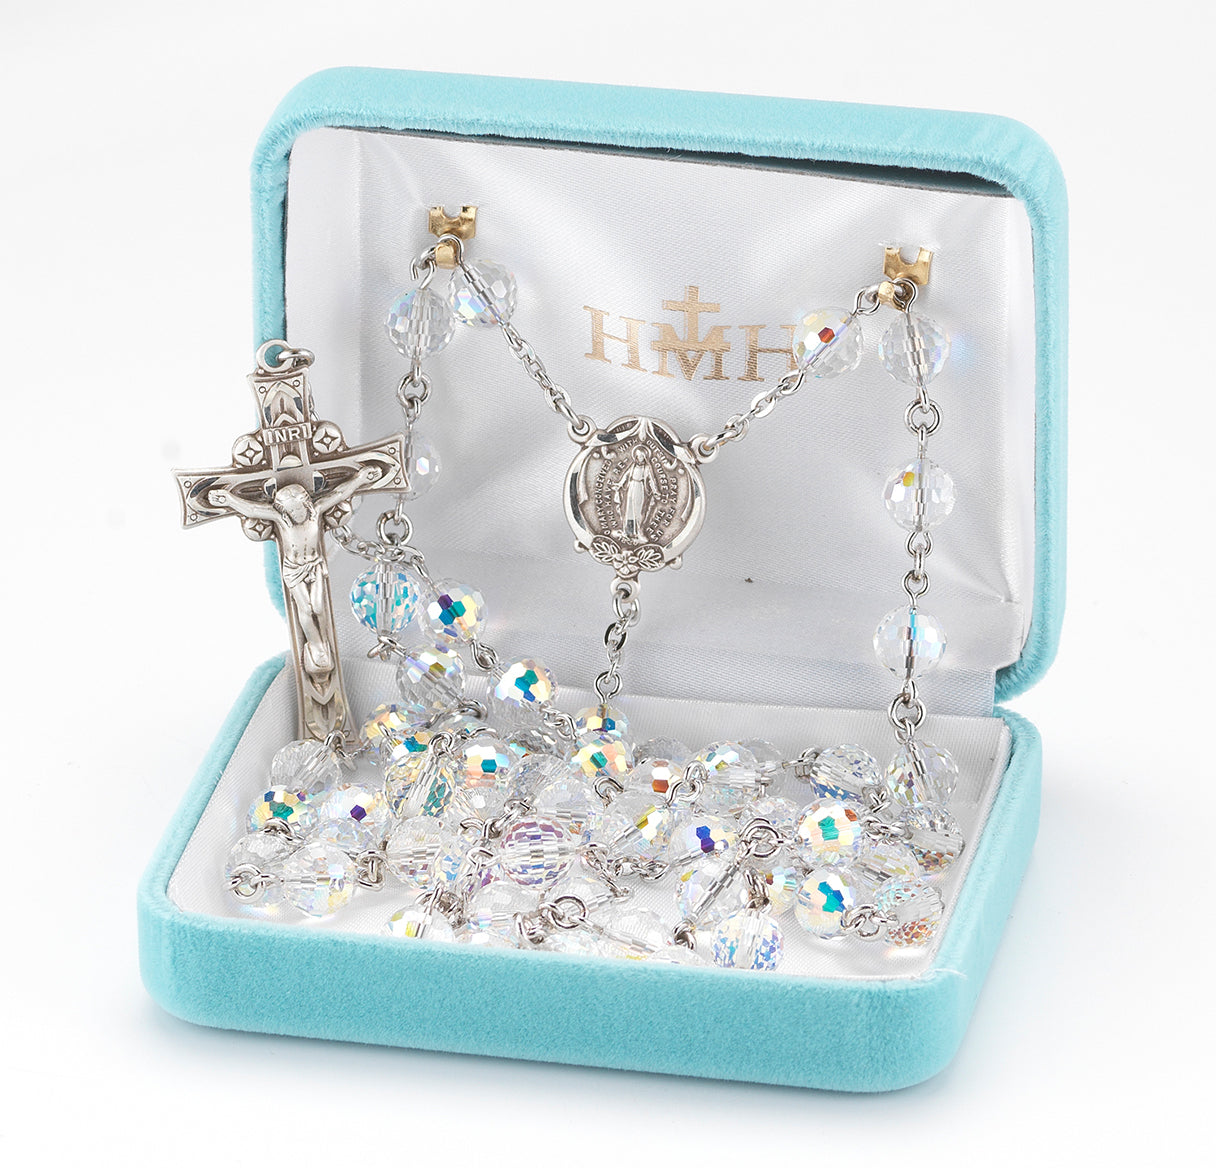 Rosary Sterling Crucifix and Centerpiece Created with Swarovski Crystal 8mm Multi-Faceted Aurora Borealis Beads by HMH